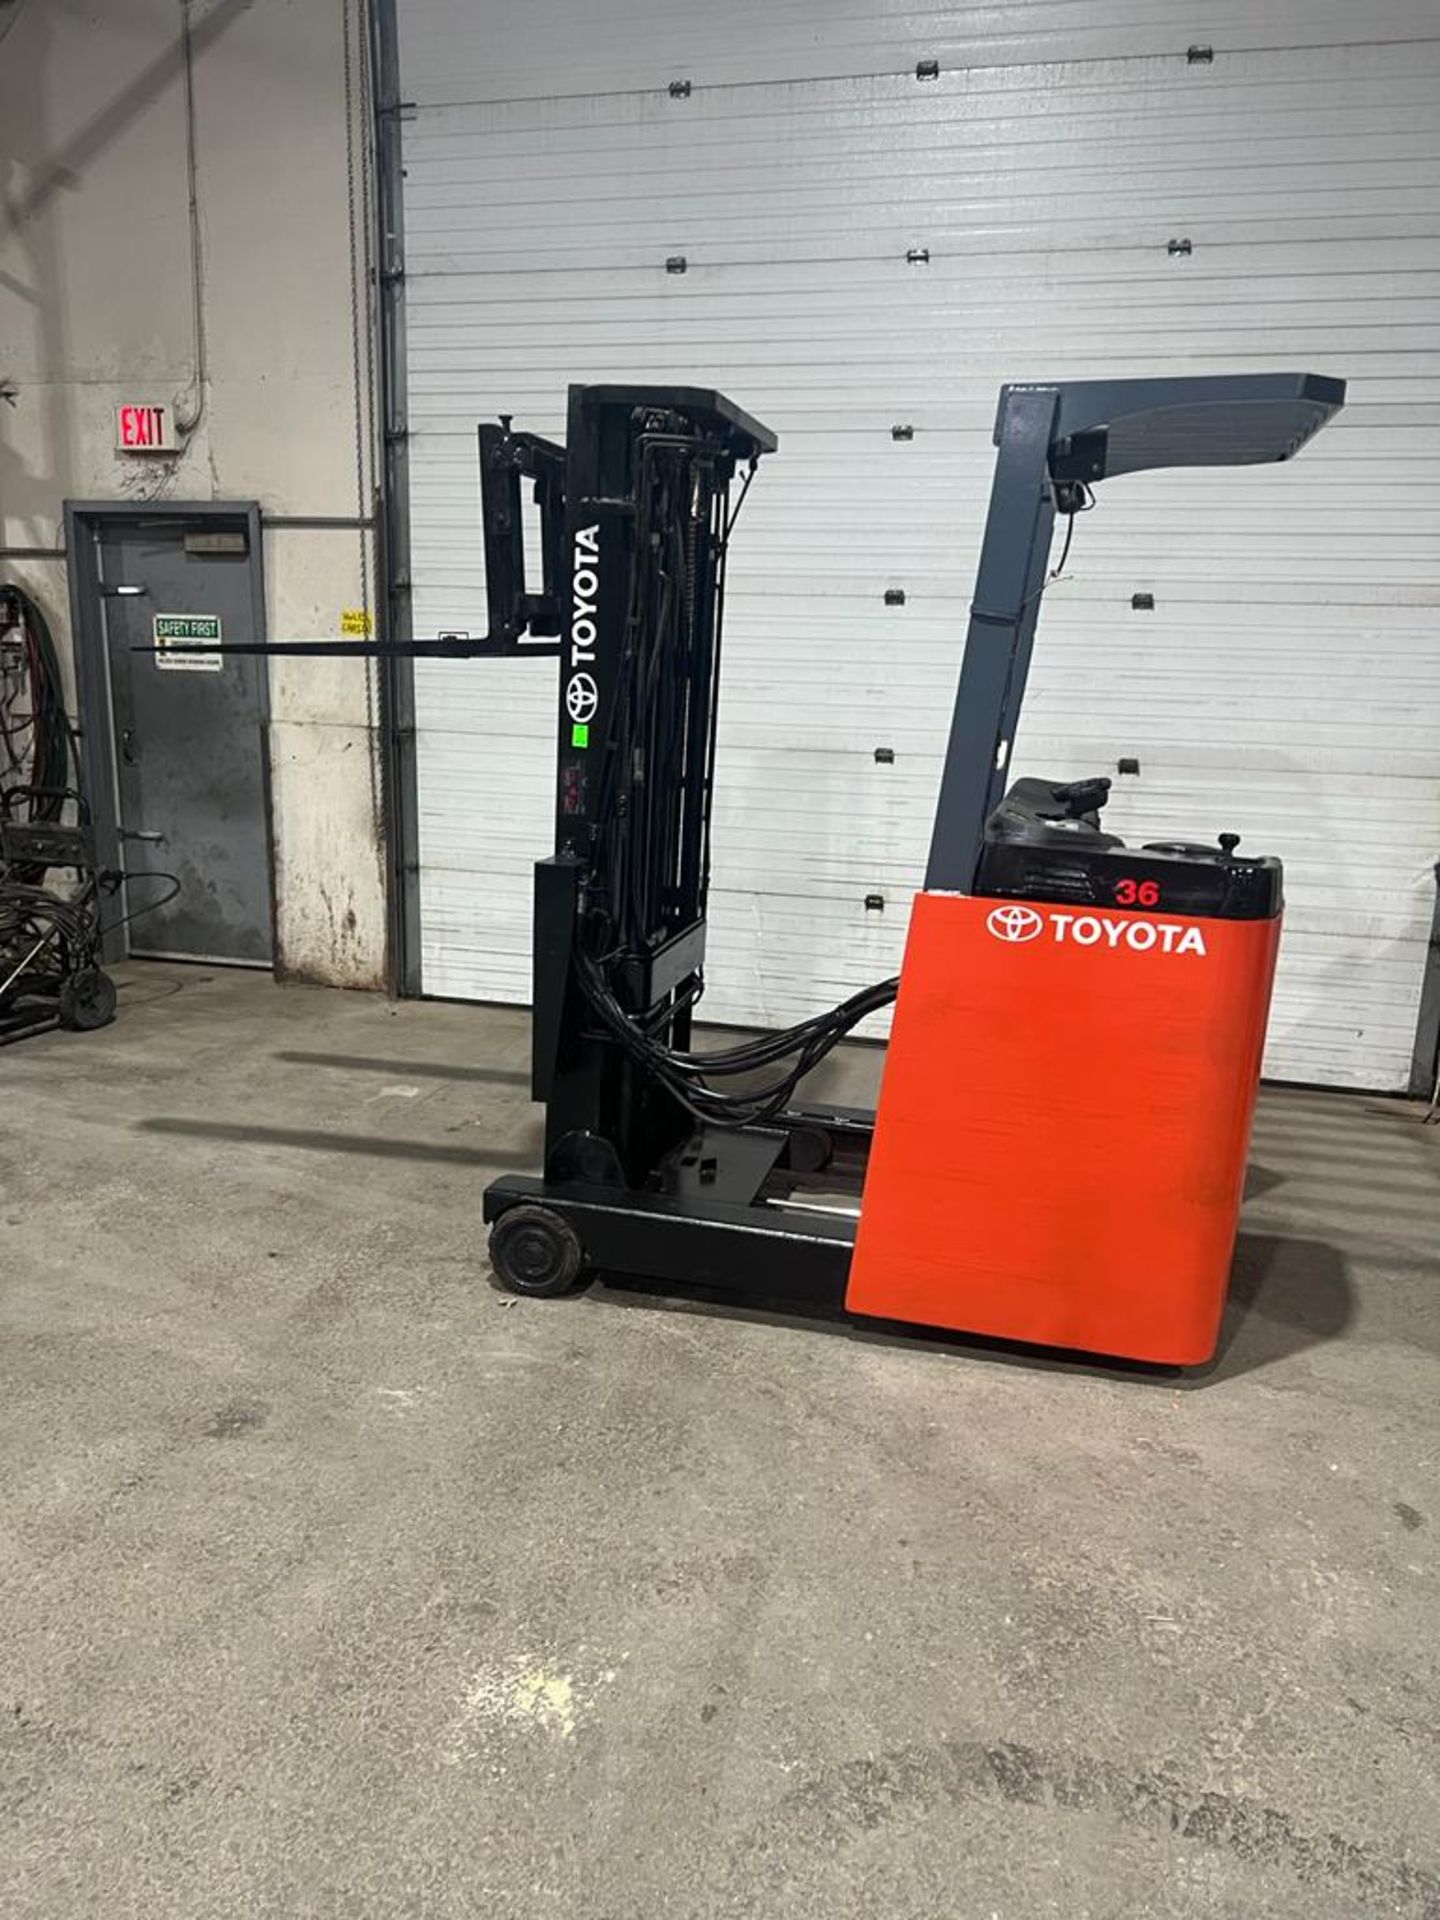 Toyota Reach Truck 3,600lbs Capacity Electric Unit with 3-stage 48V Battery with Sideshift - FREE